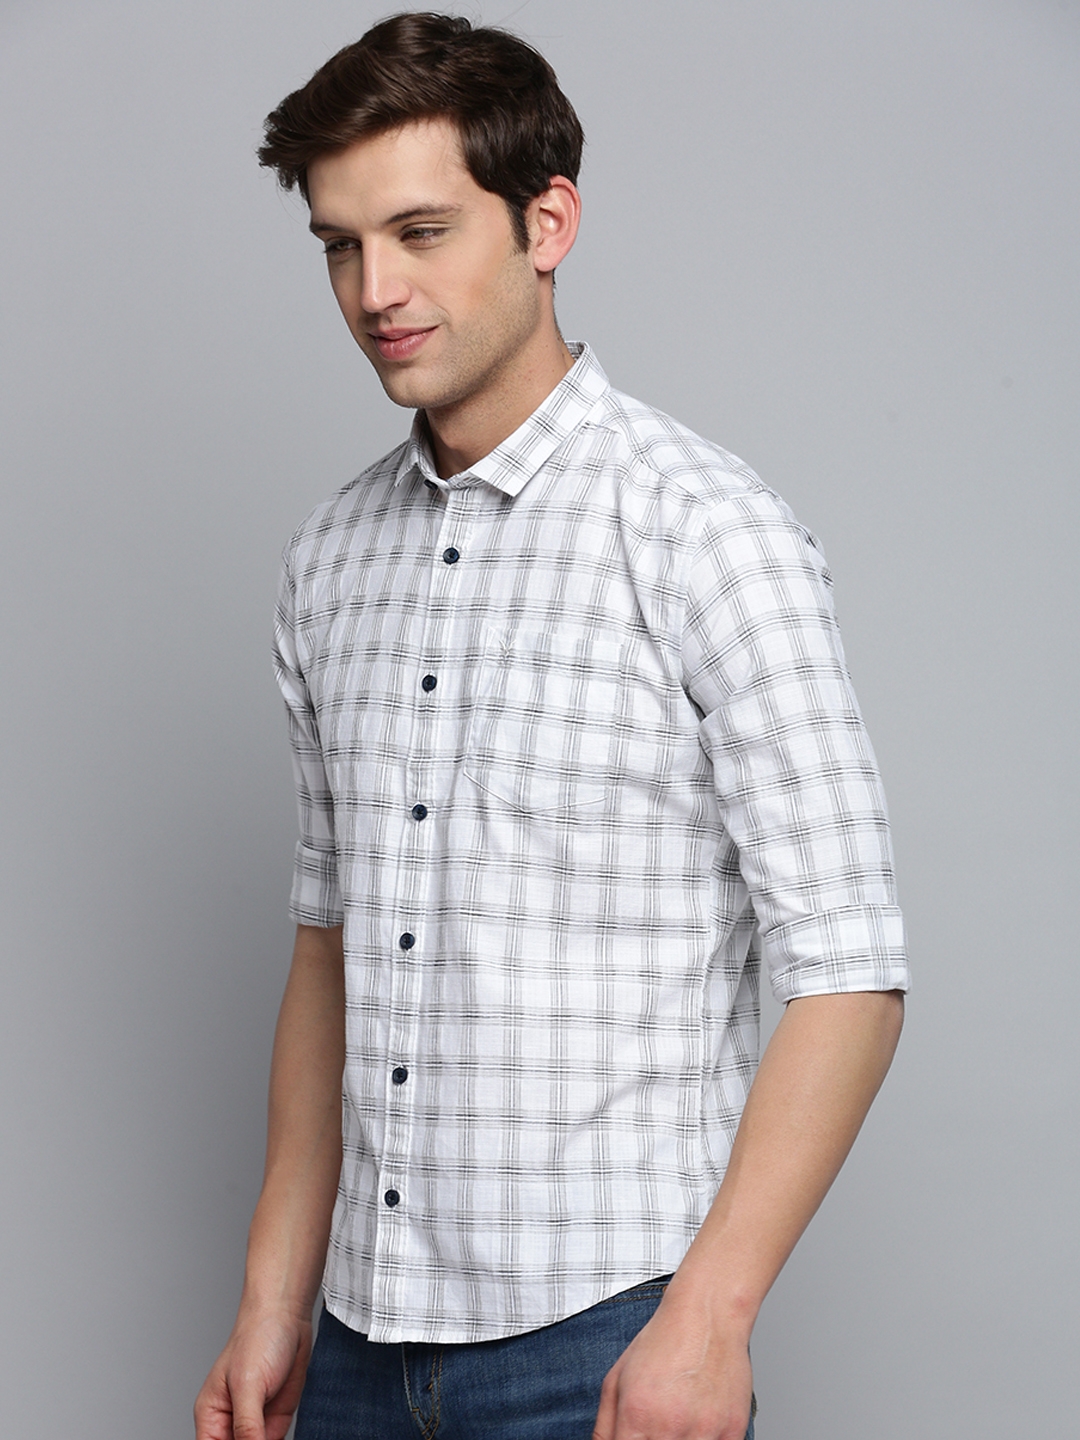 Showoff | SHOWOFF Men's Spread Collar Checked White Classic Shirt 2